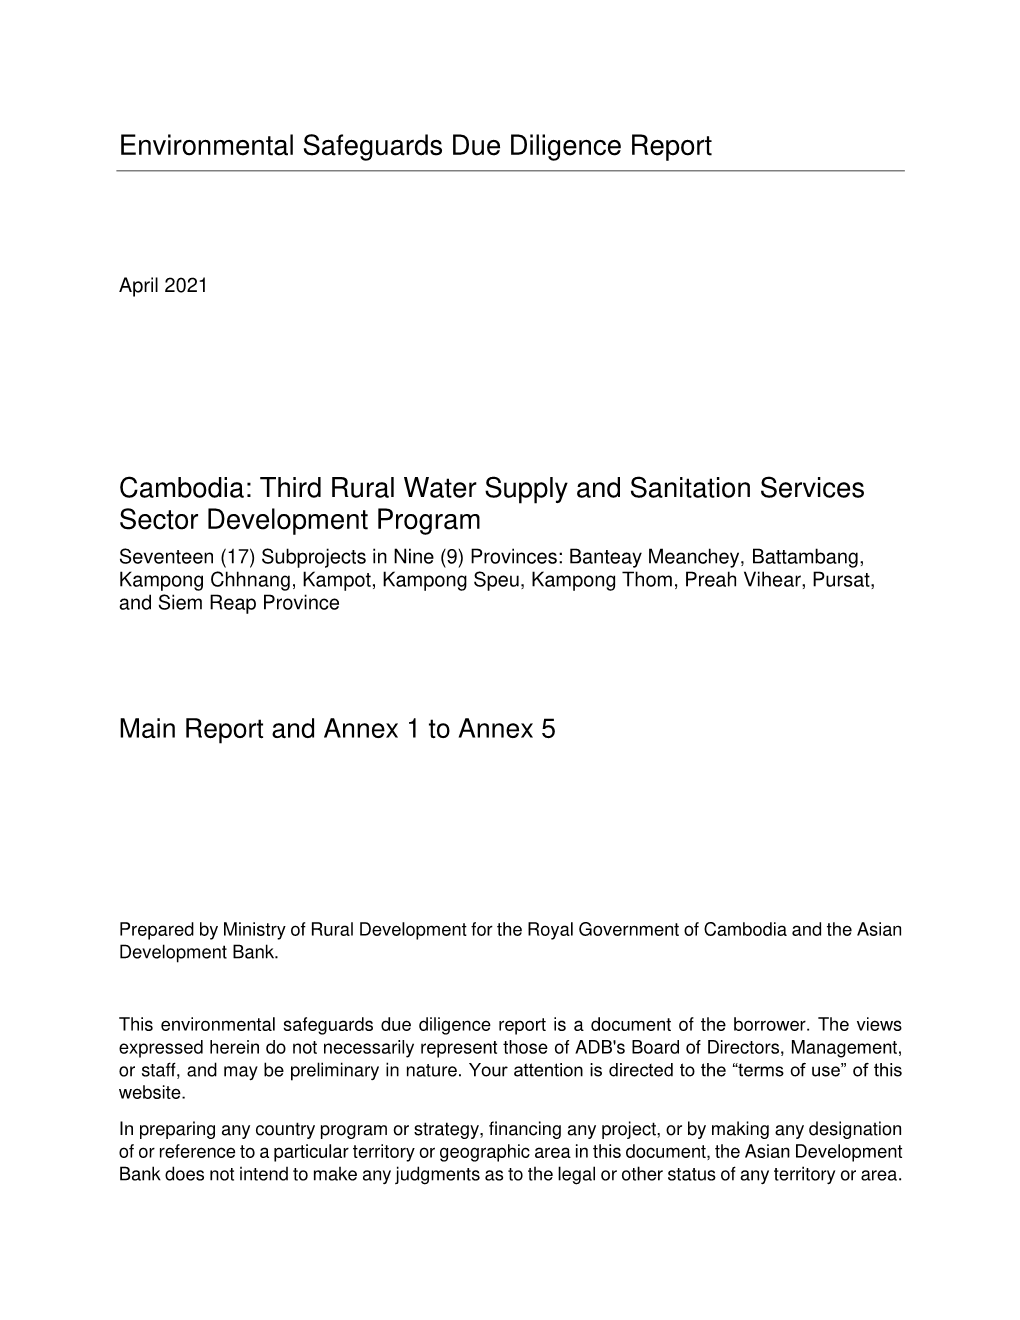 Environmental Safeguards Due Diligence Report Cambodia: Third